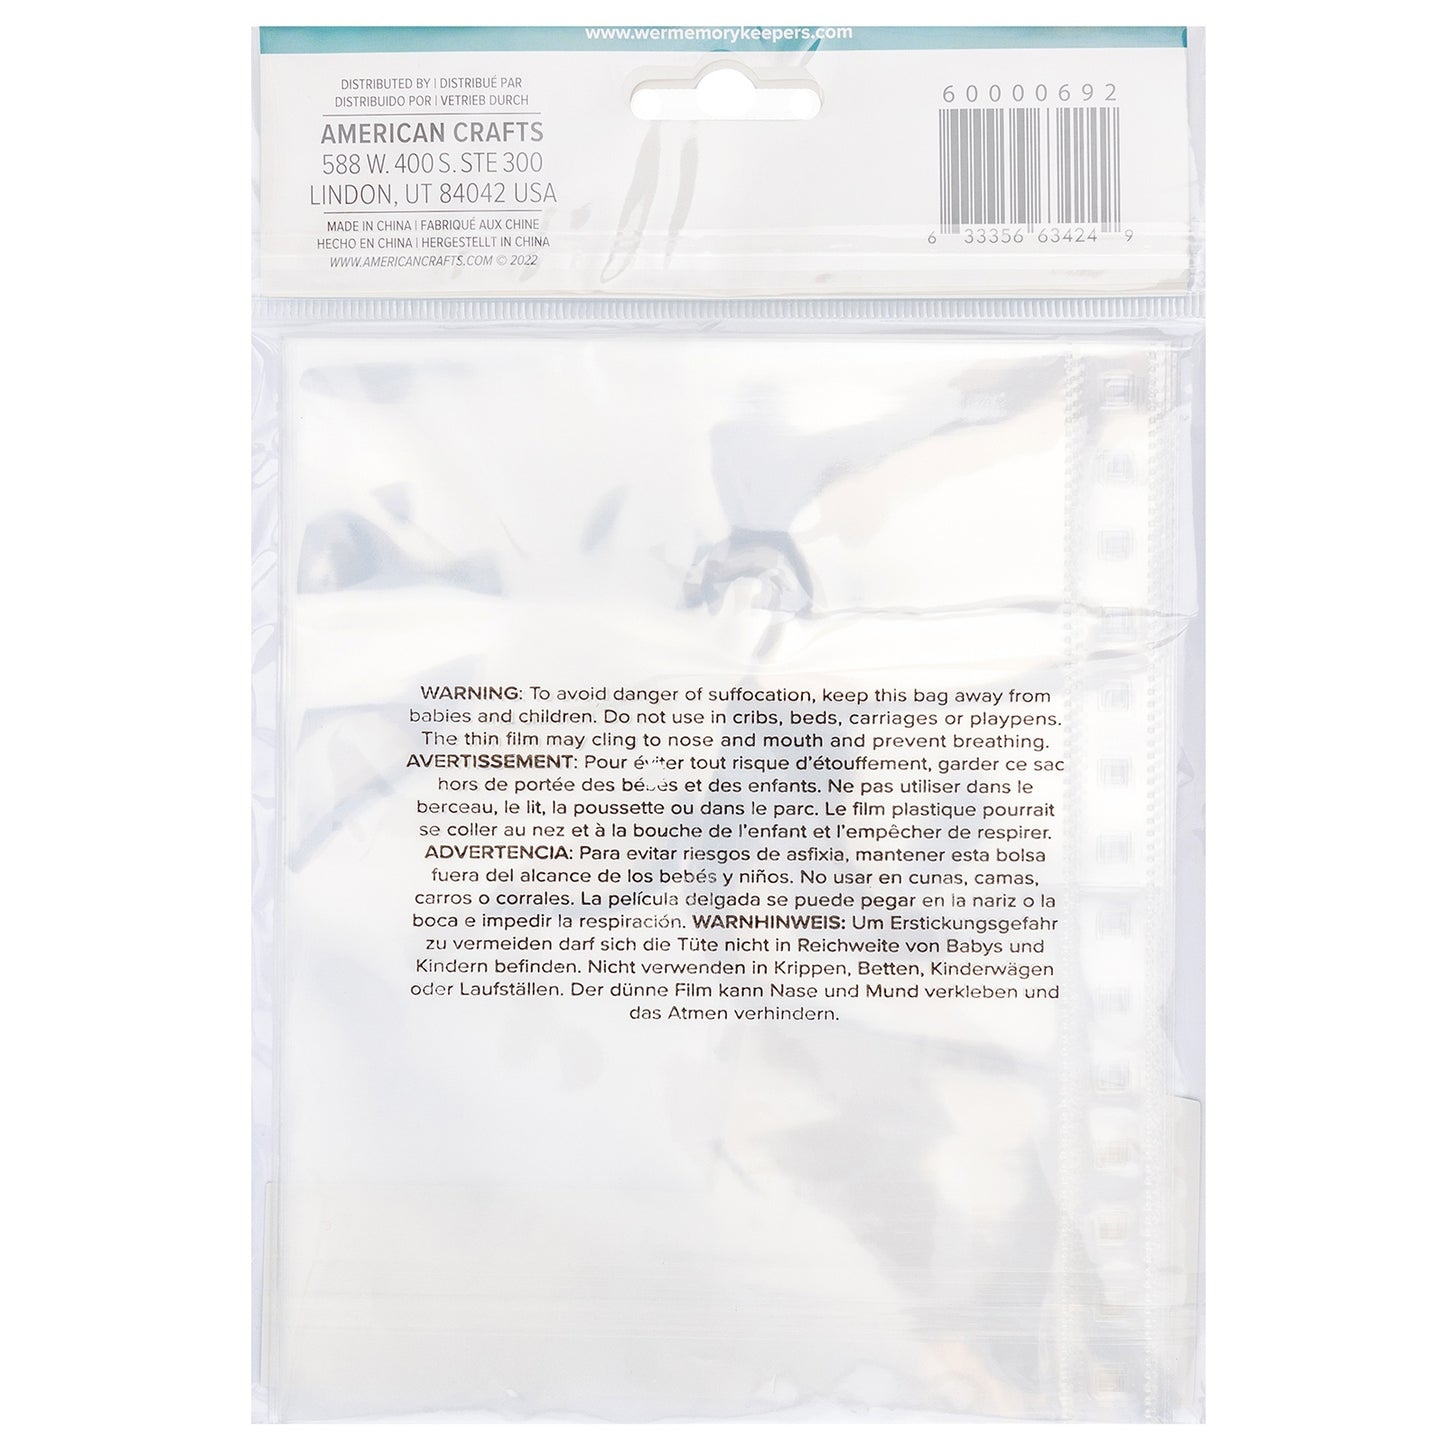 We R Memory Keepers Cinch Page Protectors 5"X7" 10/Pkg